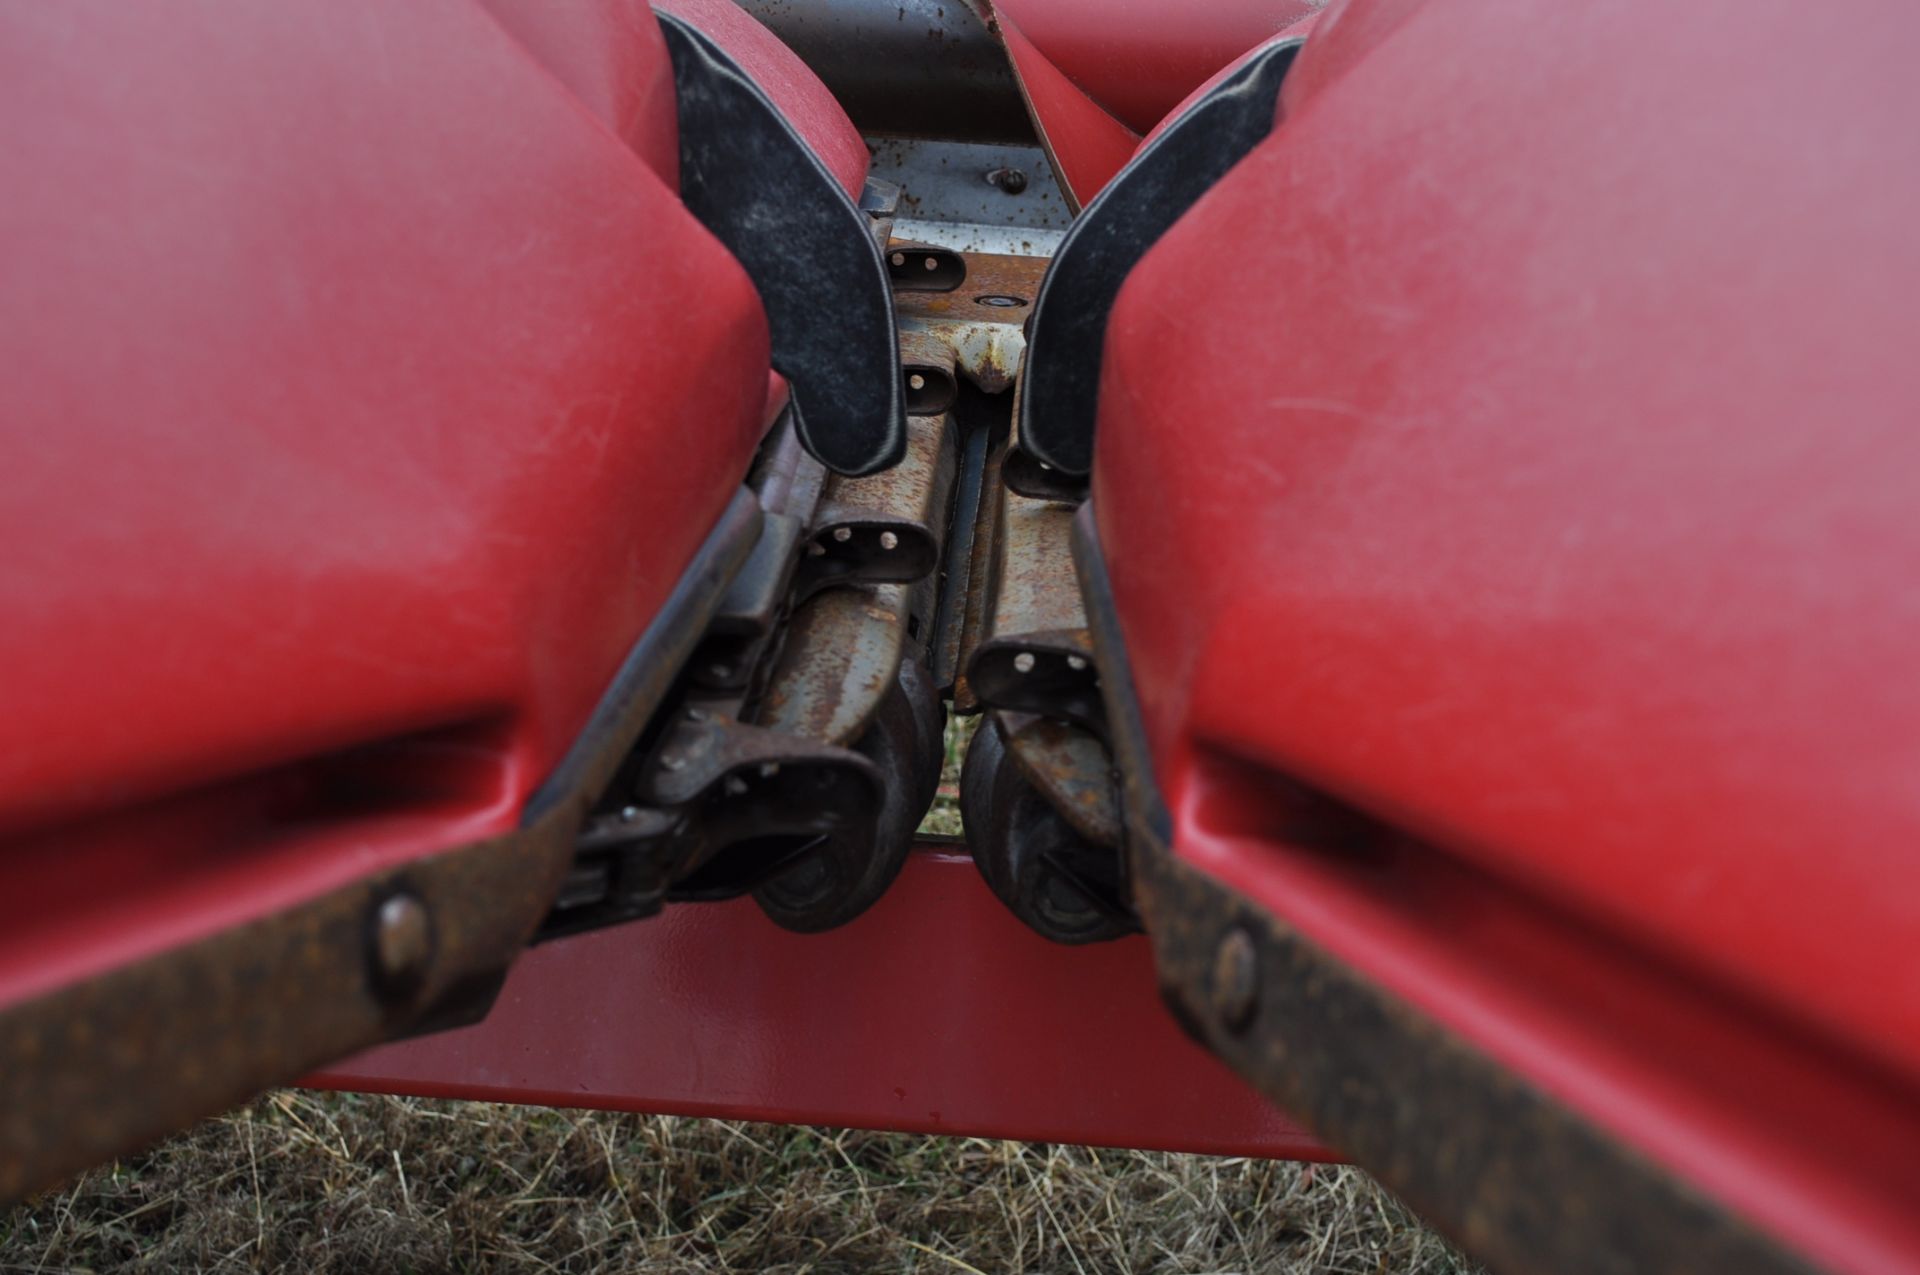 CASE IH 2208 Poly Corn Head, 8 rows x 30”, hyd deck plates, knife rolls, poly, 3 header height - Image 11 of 16